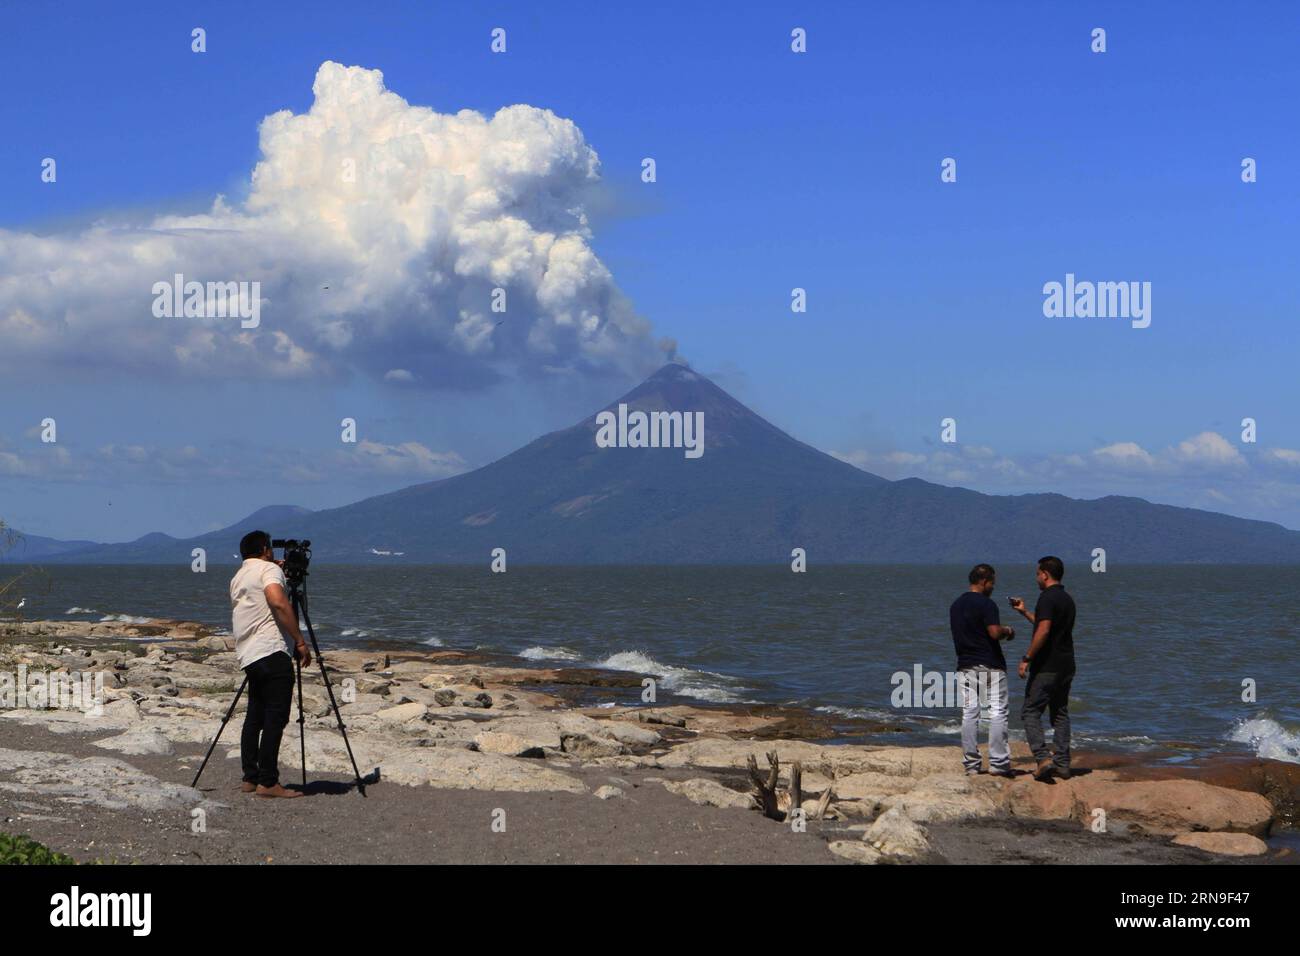 Bilder des Tages Nicaragua: Vulkan Momotombo ausgebrochen (151203) -- LEON, Dec. 2, 2015 -- People look at the Momotombo Volcano in La Paz Centro municipality, Leon department, western Nicaragua, on Dec. 2, 2015. Momotombo Volcano, located in the north of the Xolotlan Lake, western Nicaragua, continued its eruptive activity in the last hours, with incandescent material observed on its crater, according to the Municipal Committees of Disaster Prevention. ) NICARAGUA-LEON-ENVIRONMENT-VOLCANO JOHNxBUSTOS PUBLICATIONxNOTxINxCHN   Images the Day Nicaragua Volcano Momotombo erupted 151203 Leon DEC 2 Stock Photo